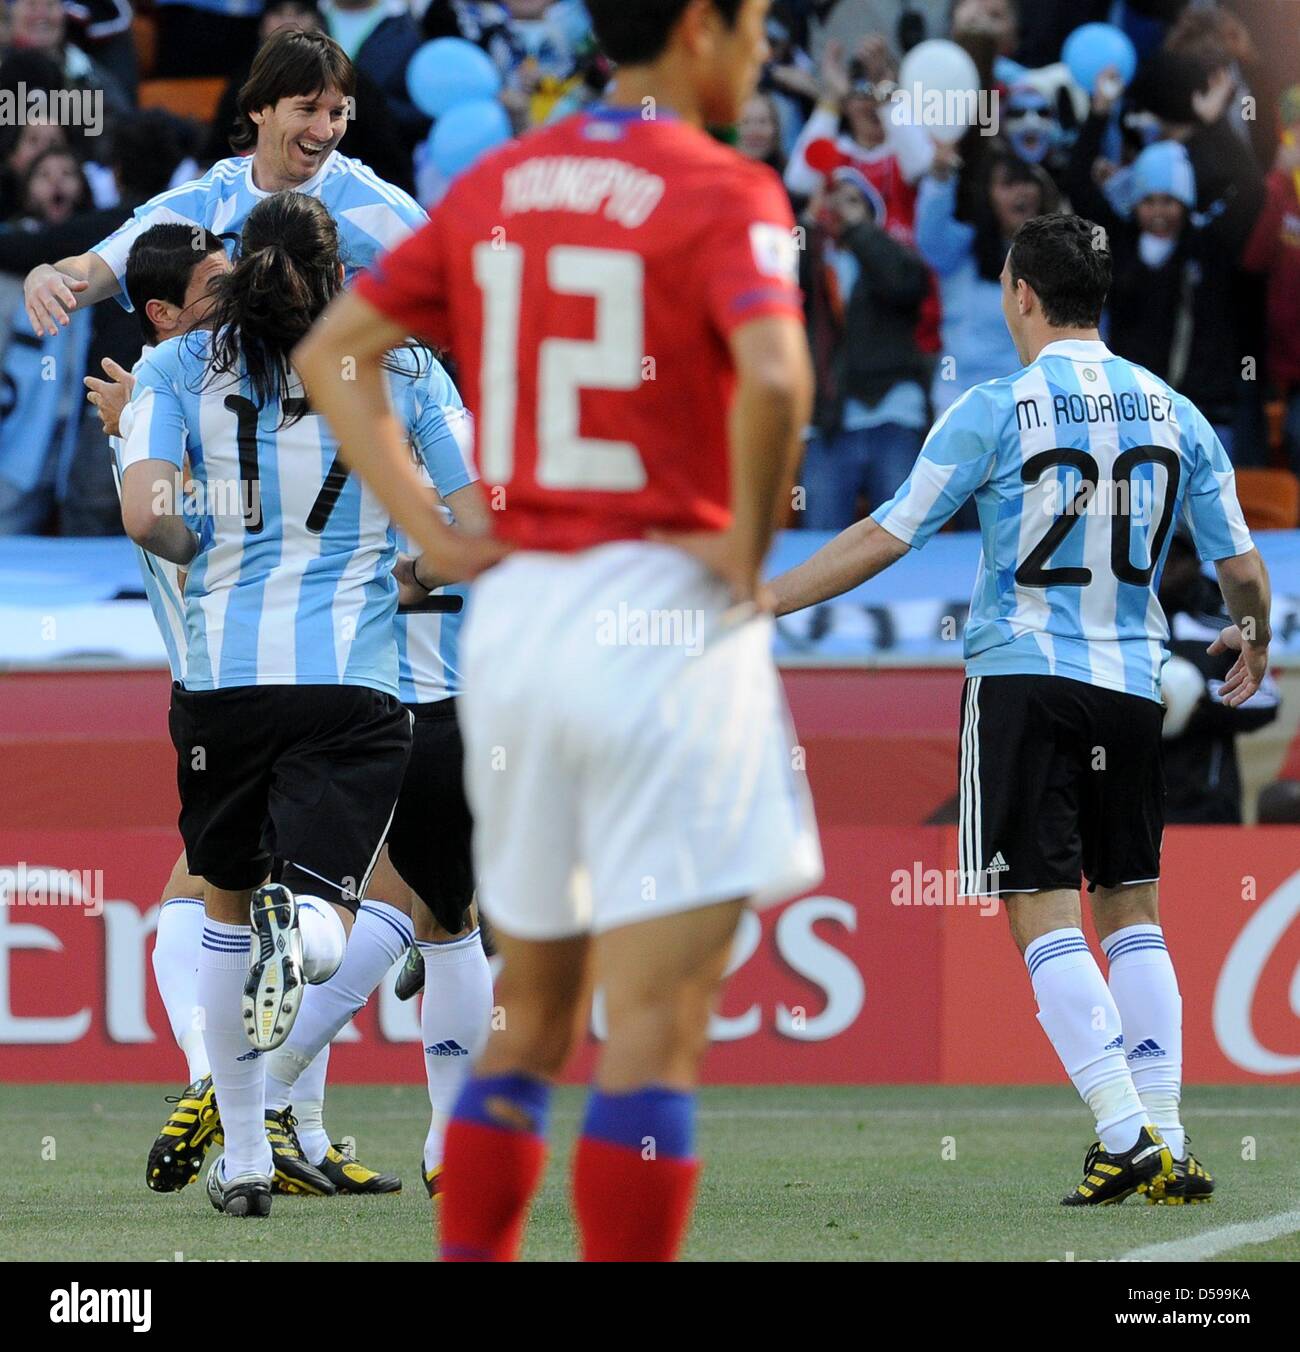 Argentina's Lionel Messi (L-R), Angel di Maria and Maxi Rodriguez celebrate the 1-0 by own goal during the 2010 FIFA World Cup group B match between Argentina and South Korea at Soccer City Stadium in Johannesburg, South Africa 17 June 2010. Photo: Achim Scheidemann - Please refer to http://dpaq.de/FIFA-WM2010-TC  +++(c) dpa - Bildfunk+++ Stock Photo